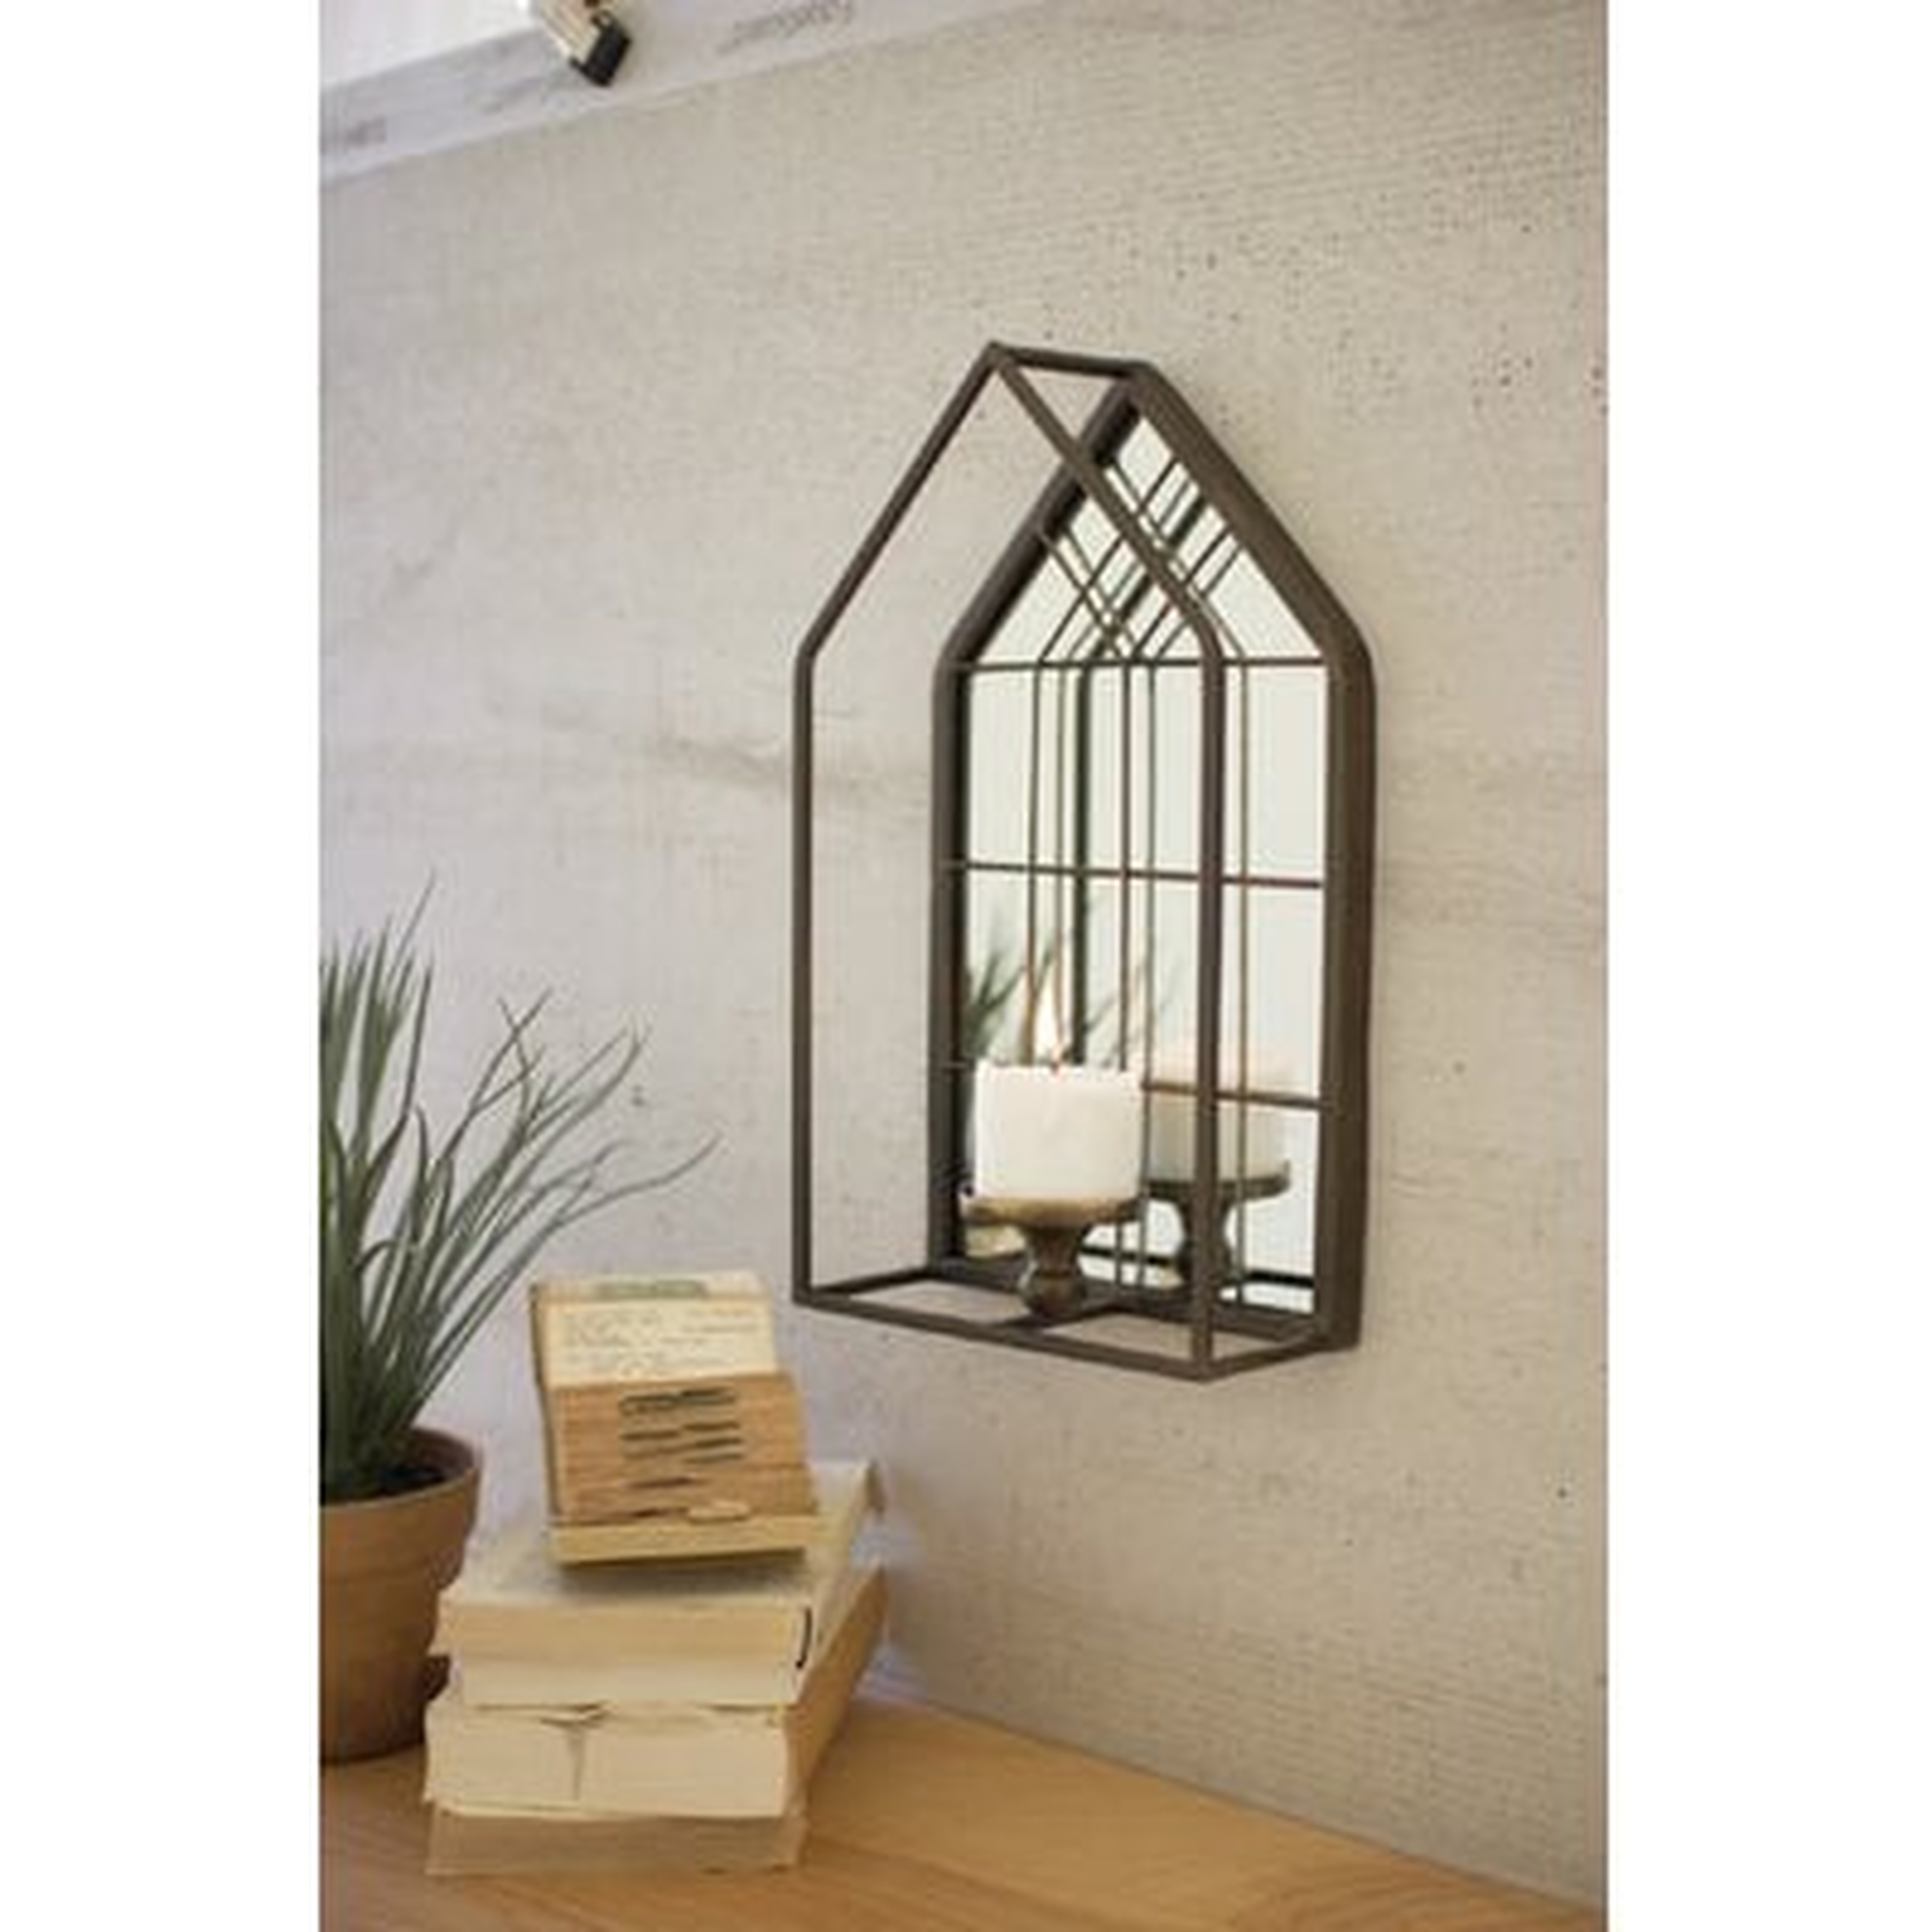 House Shape Wall Mirror With Candle Holder - Wayfair